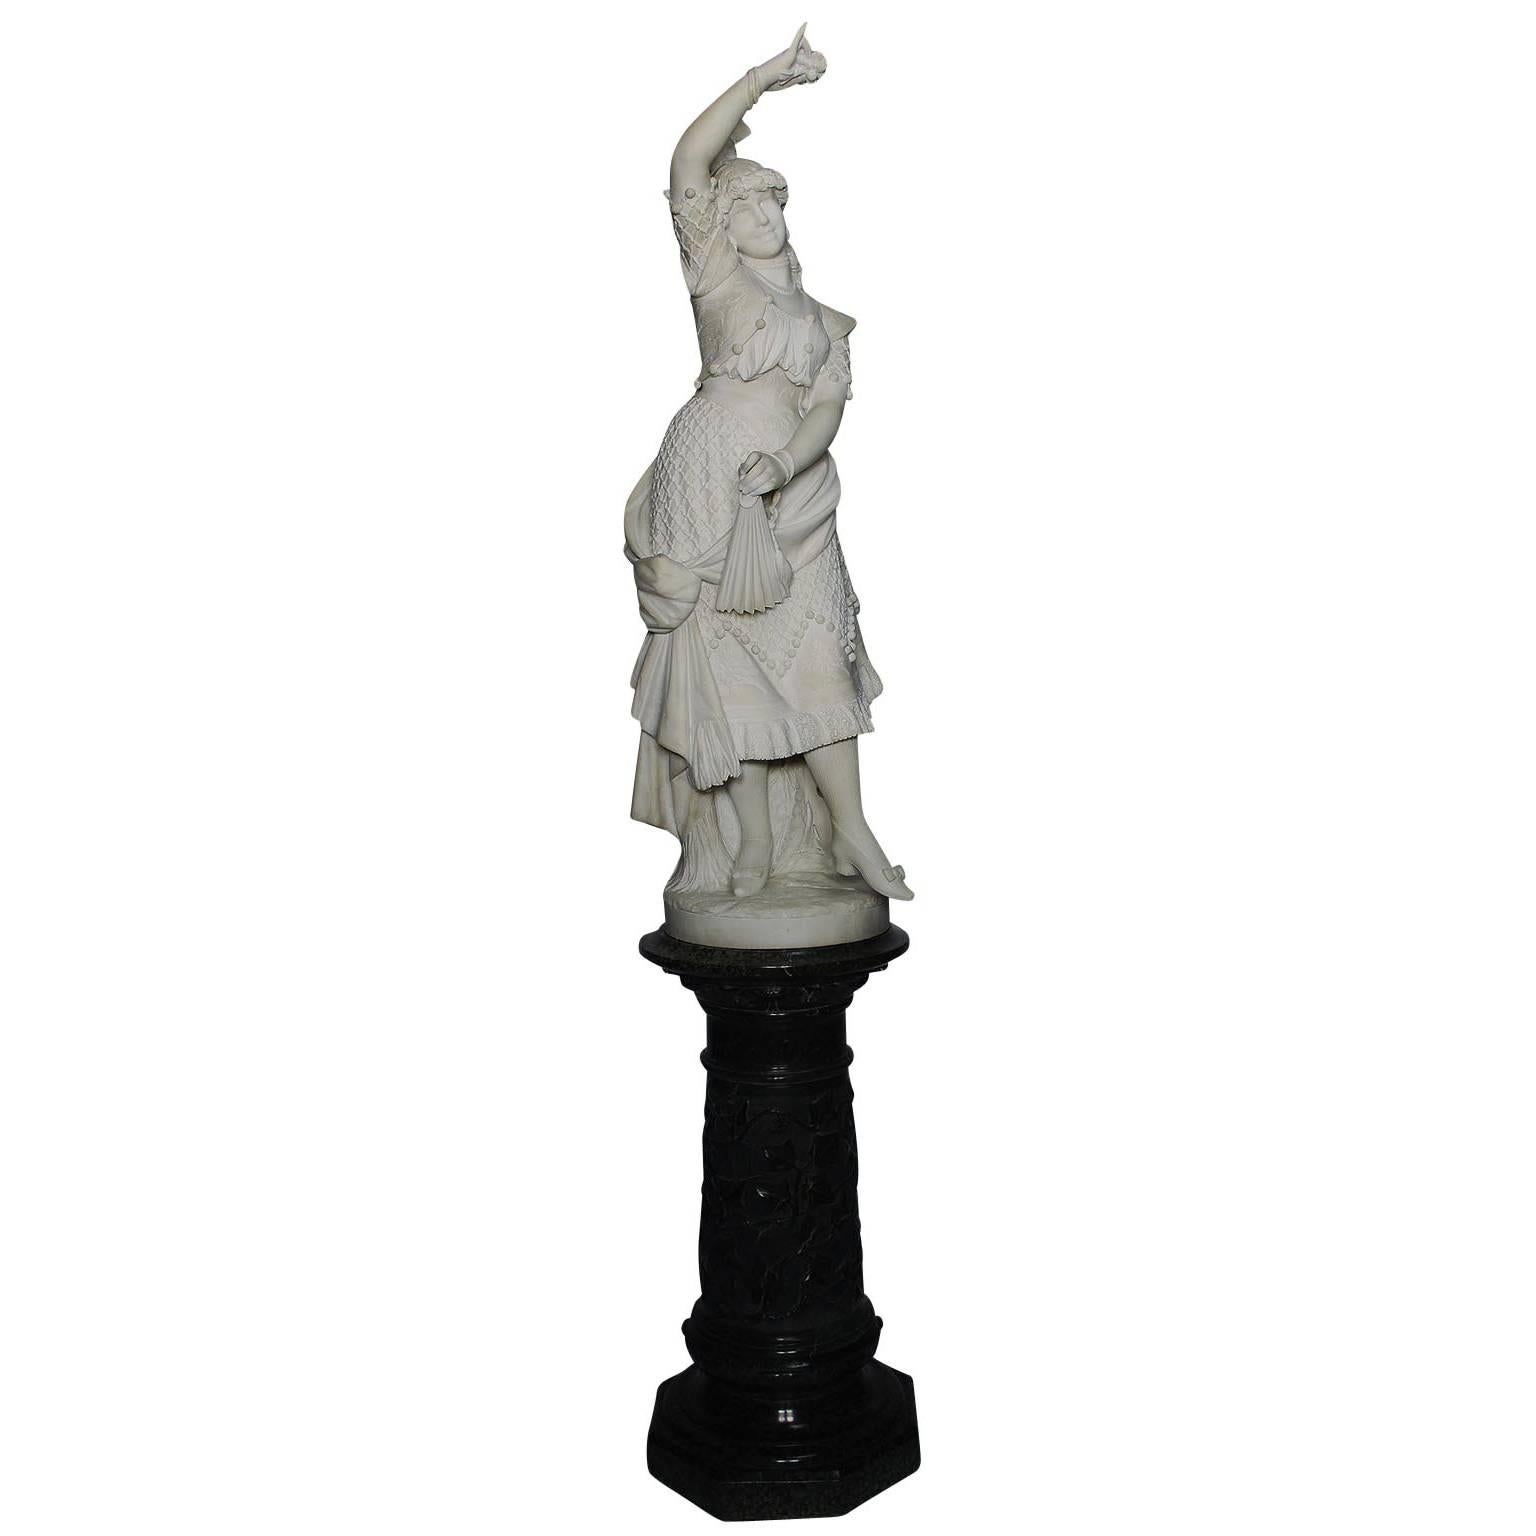 A very finely carved Italian 19th century Carrara marble figure of 